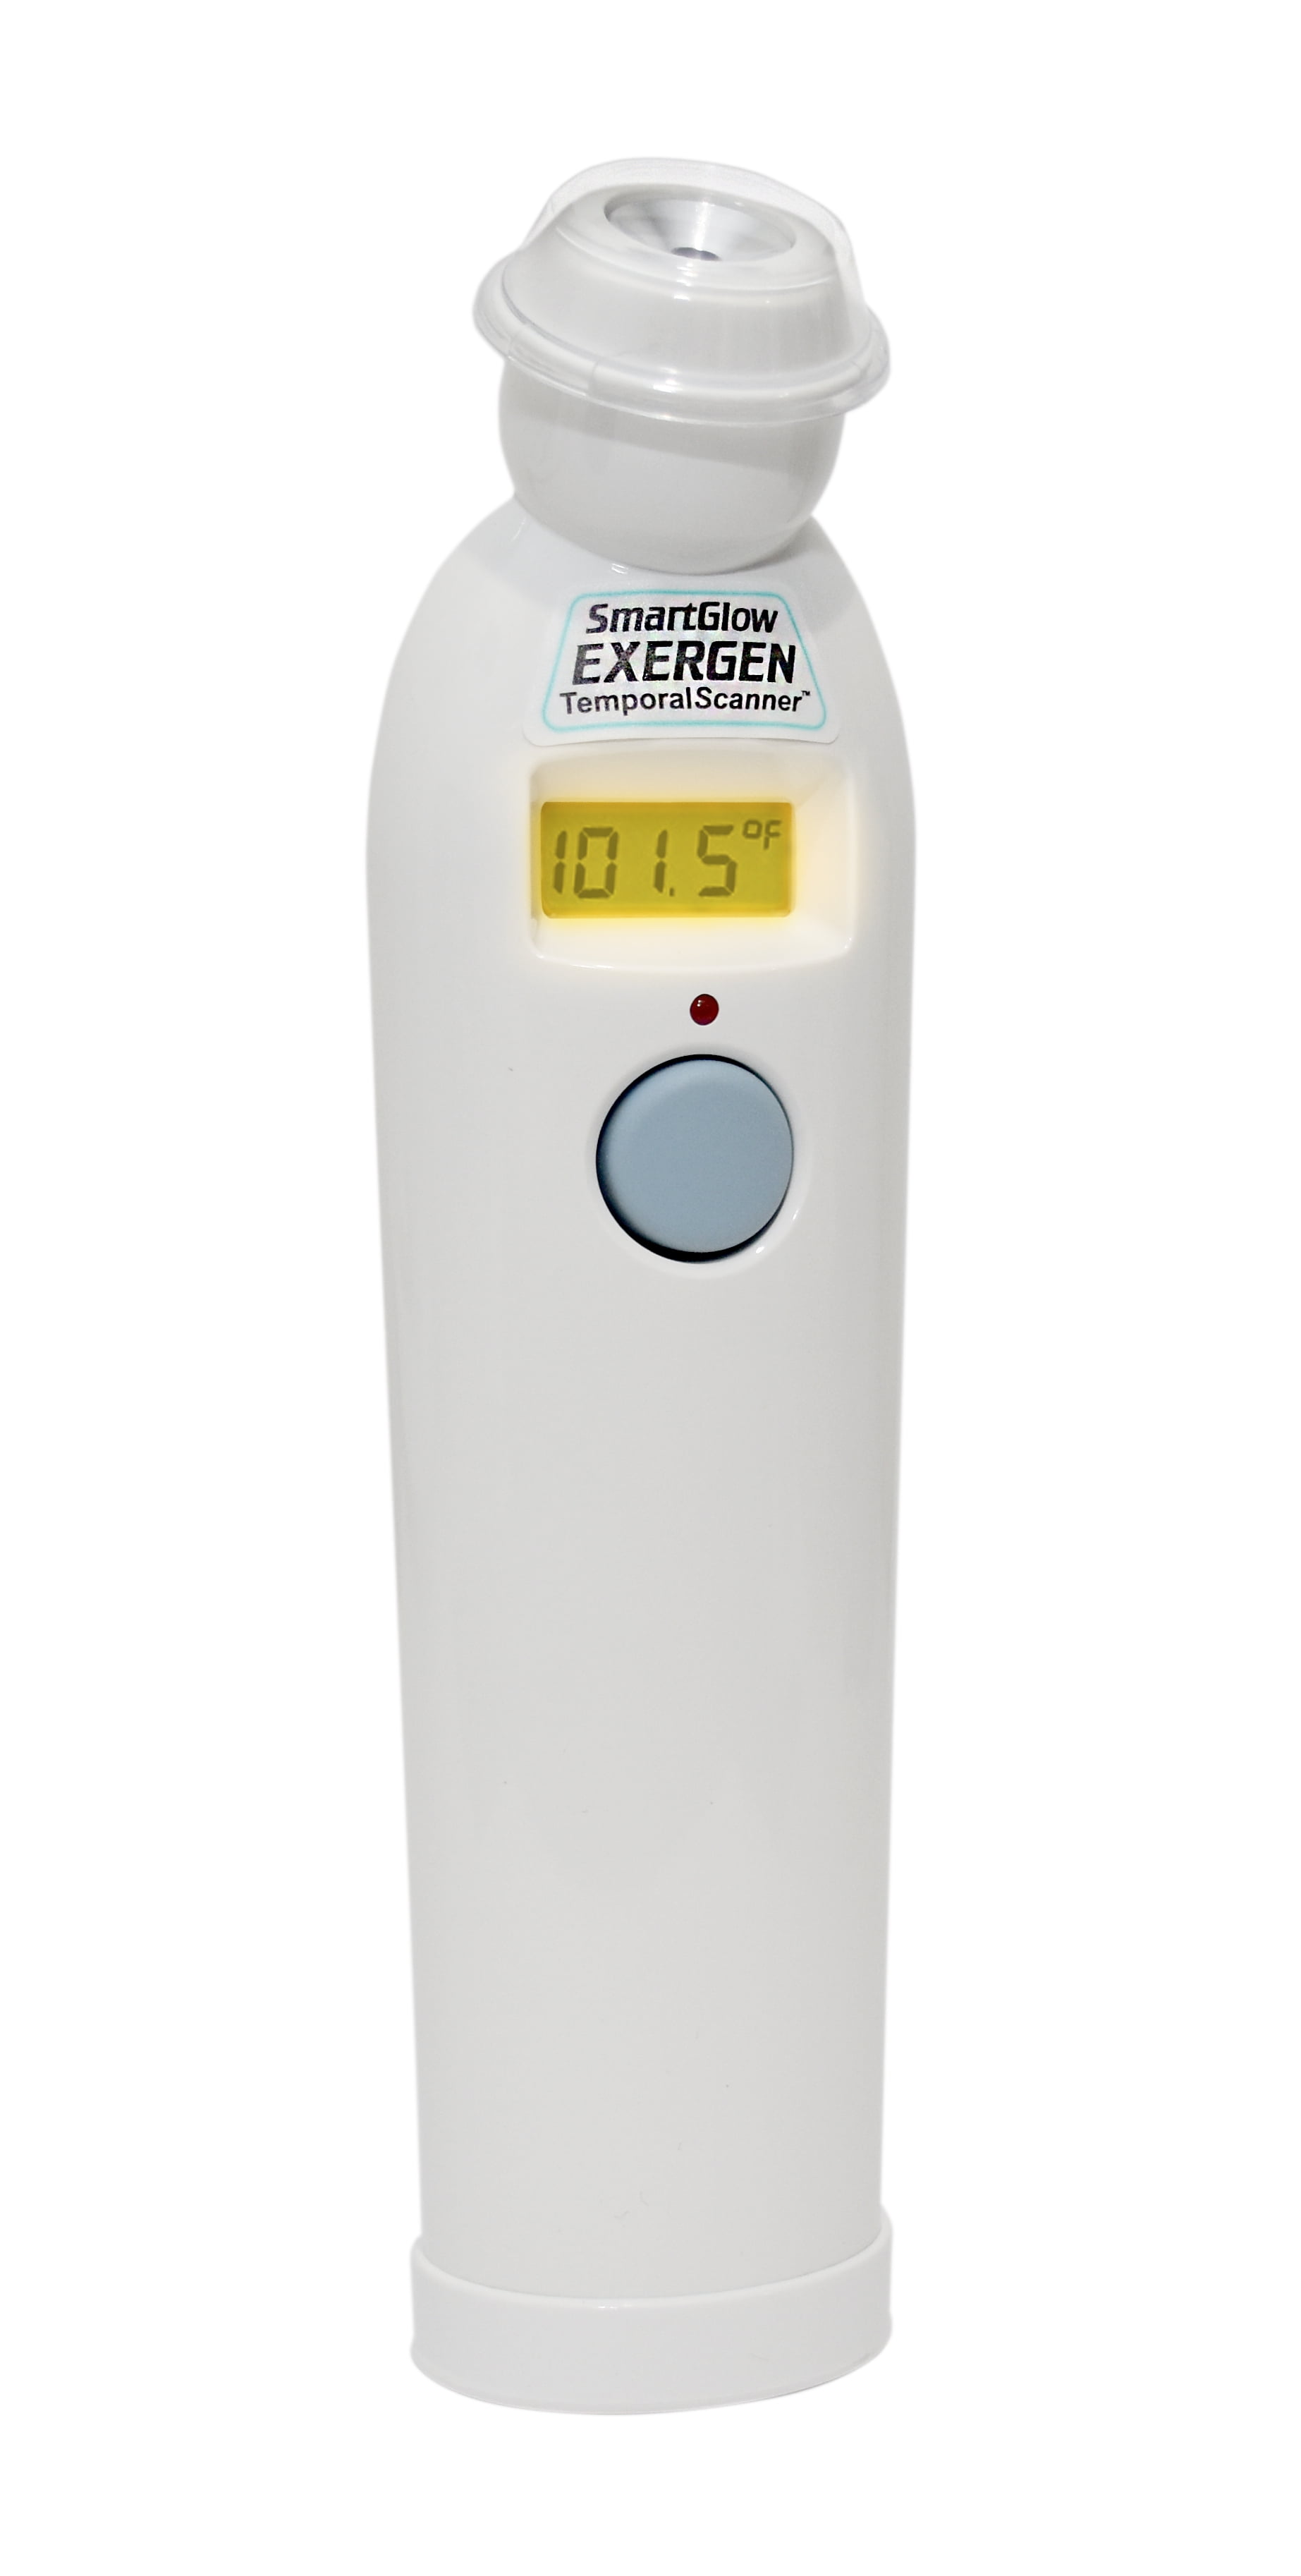 Exergen Medical Thermometer, TAT-2000C with Smart Glow Features, Professionally Accurate Body Temperature with a Forehead Swipe